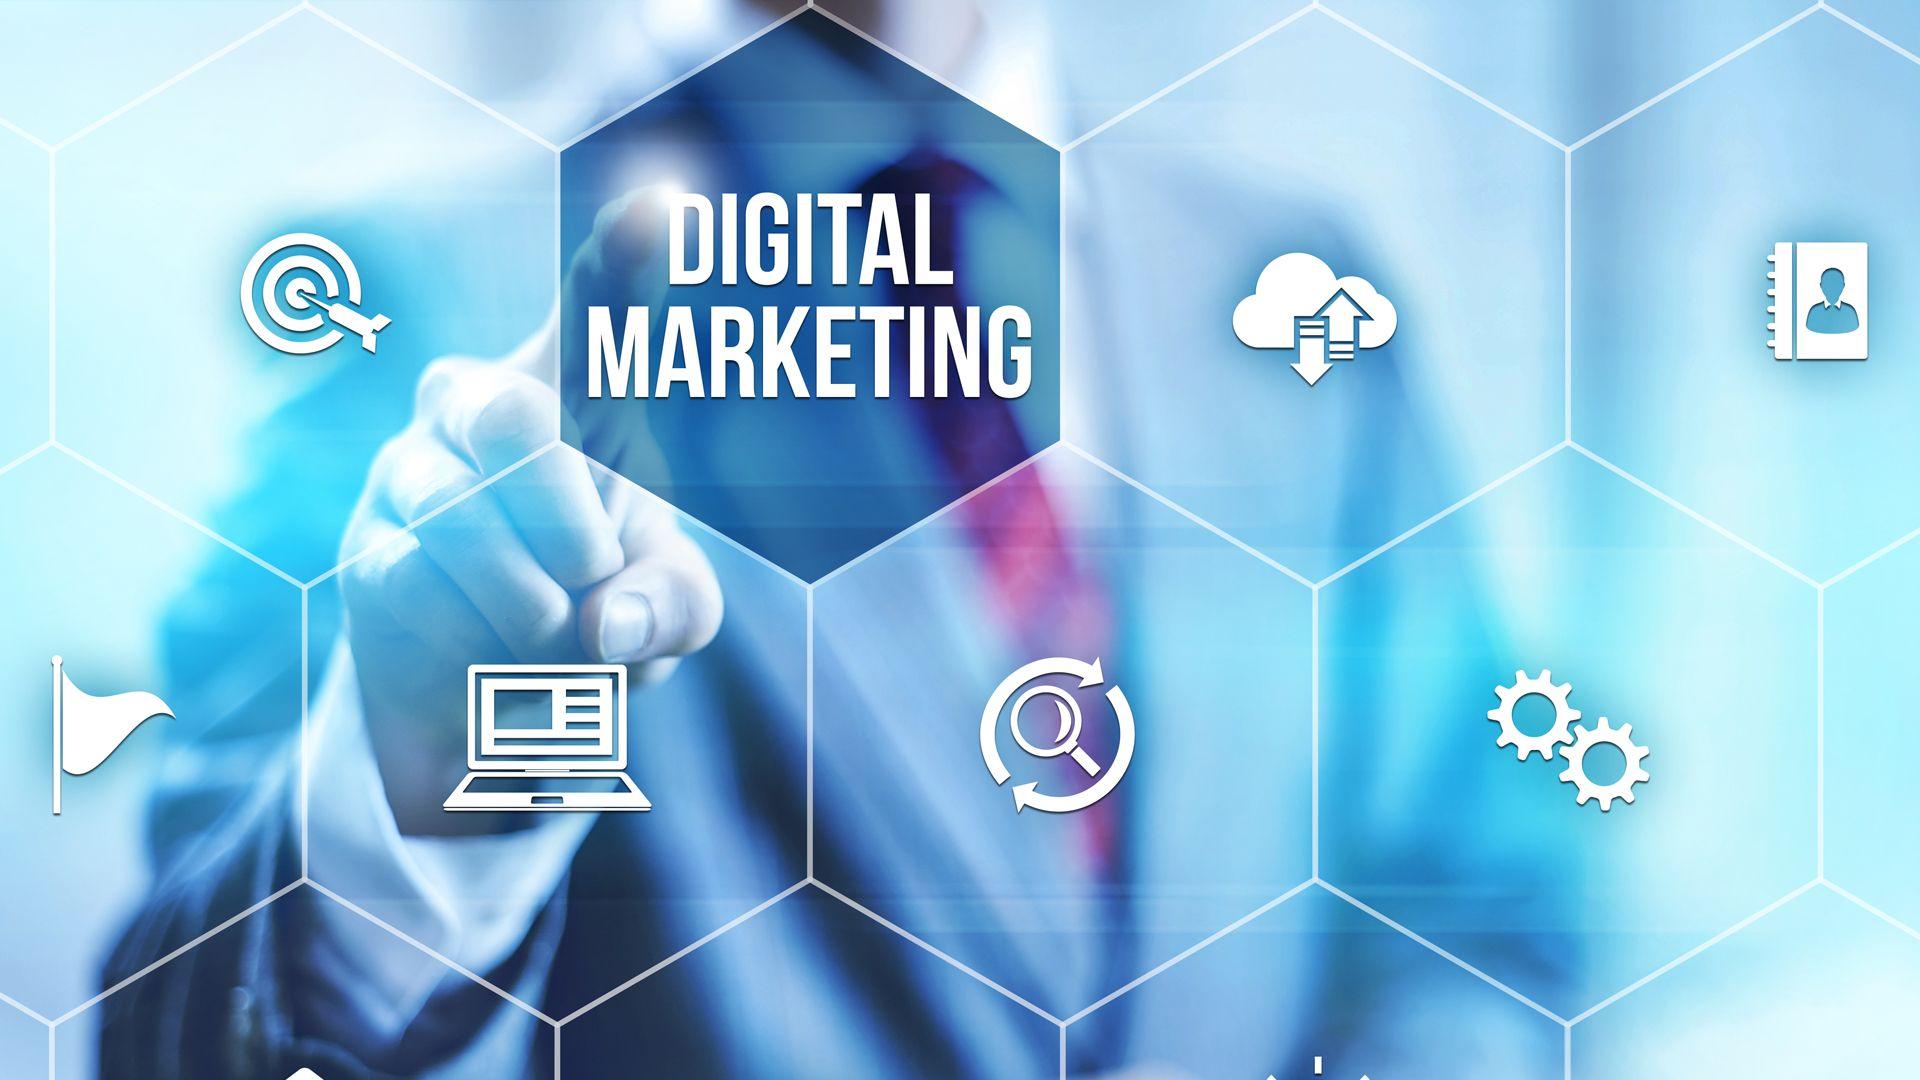 How the Digital Marketing Companies Can Help Clients